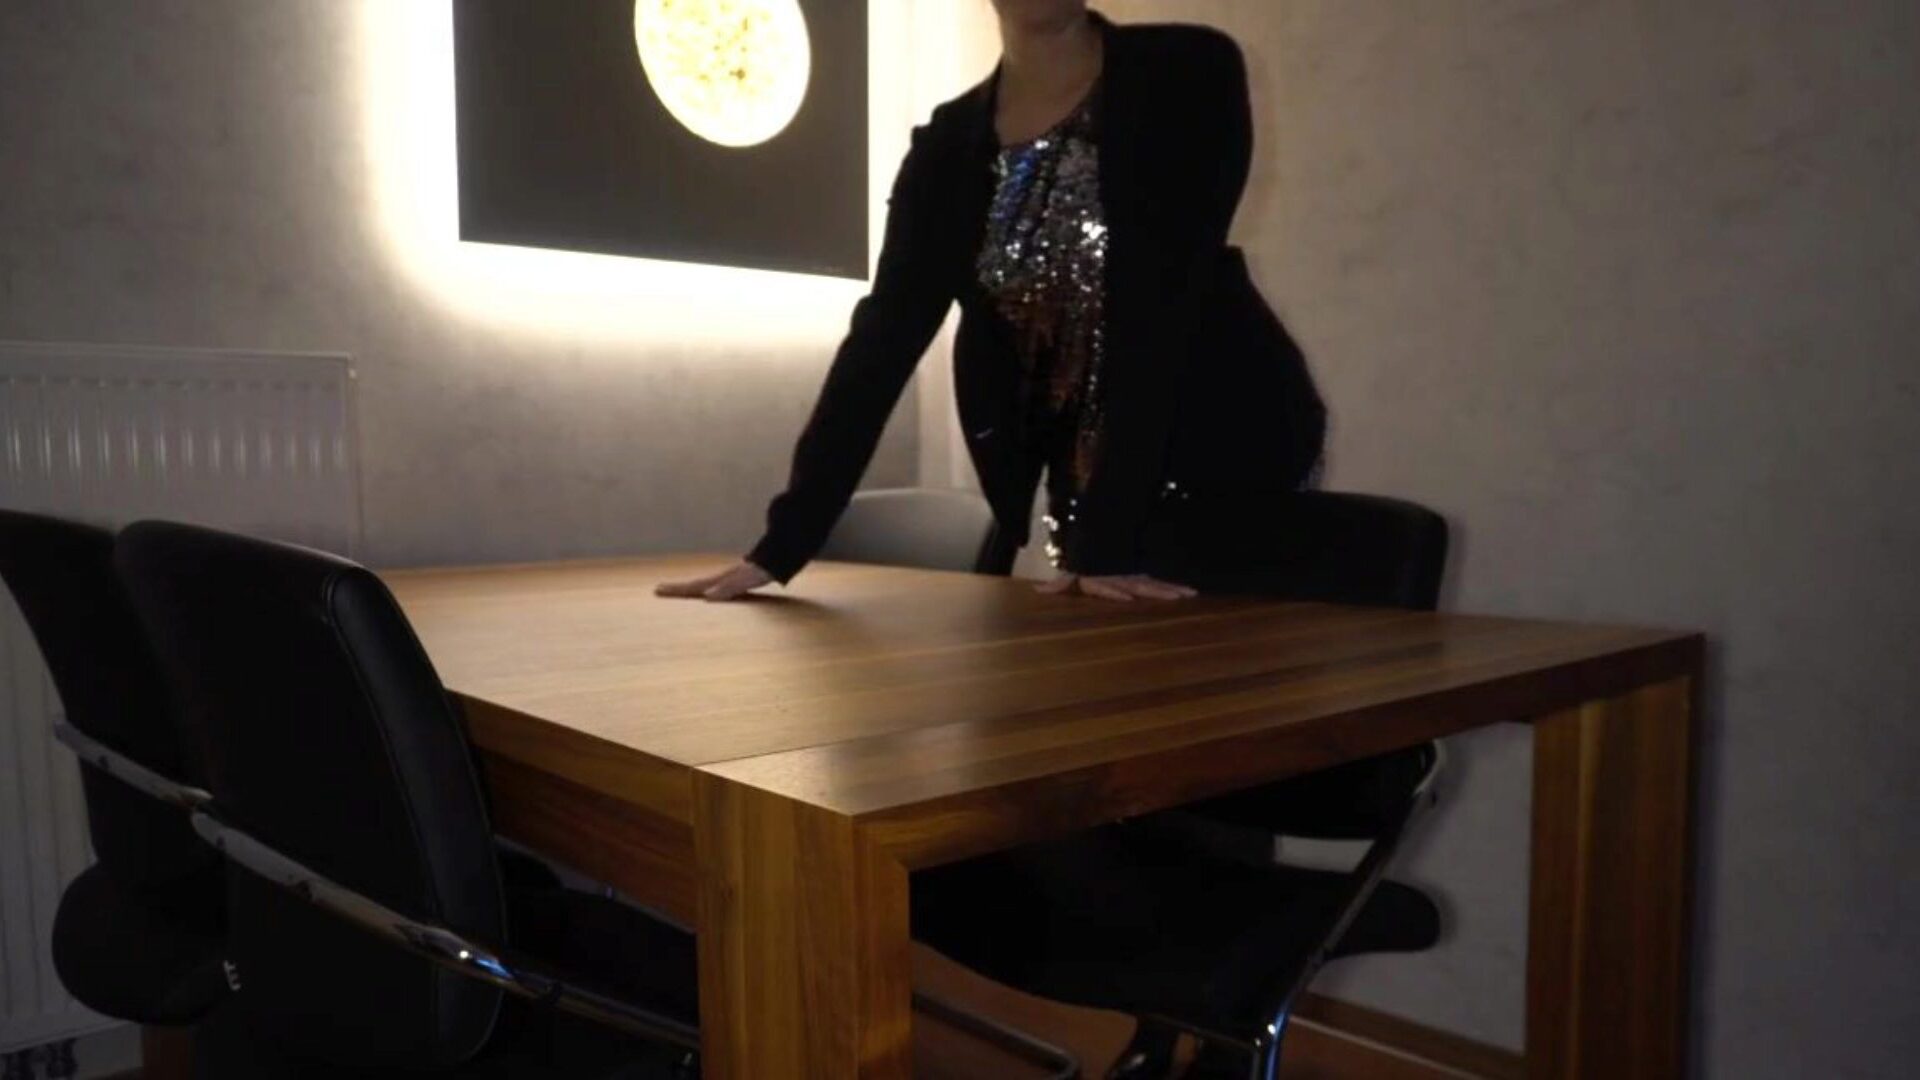 boss fucks secretary anally on the table ... watch boss fucks sekretary anally on the table - business-bitch episode on xhamster - the ultimate bevy of free-for-all danish milf hd porno tube videos